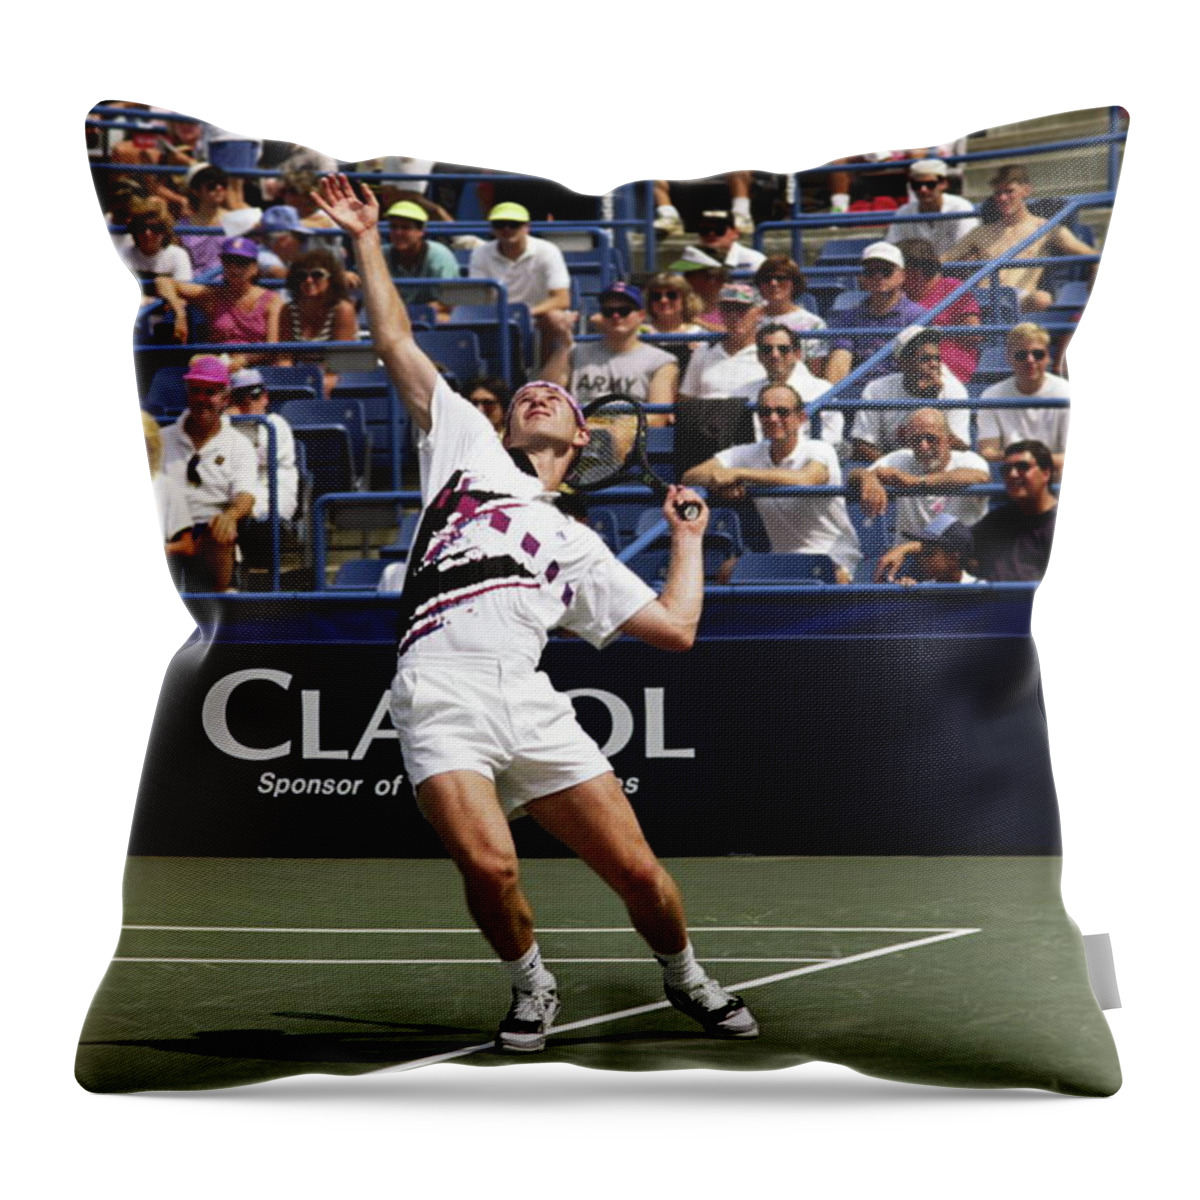 John Mcenroe Serving Throw Pillow featuring the photograph Tennis Serve by Sally Weigand